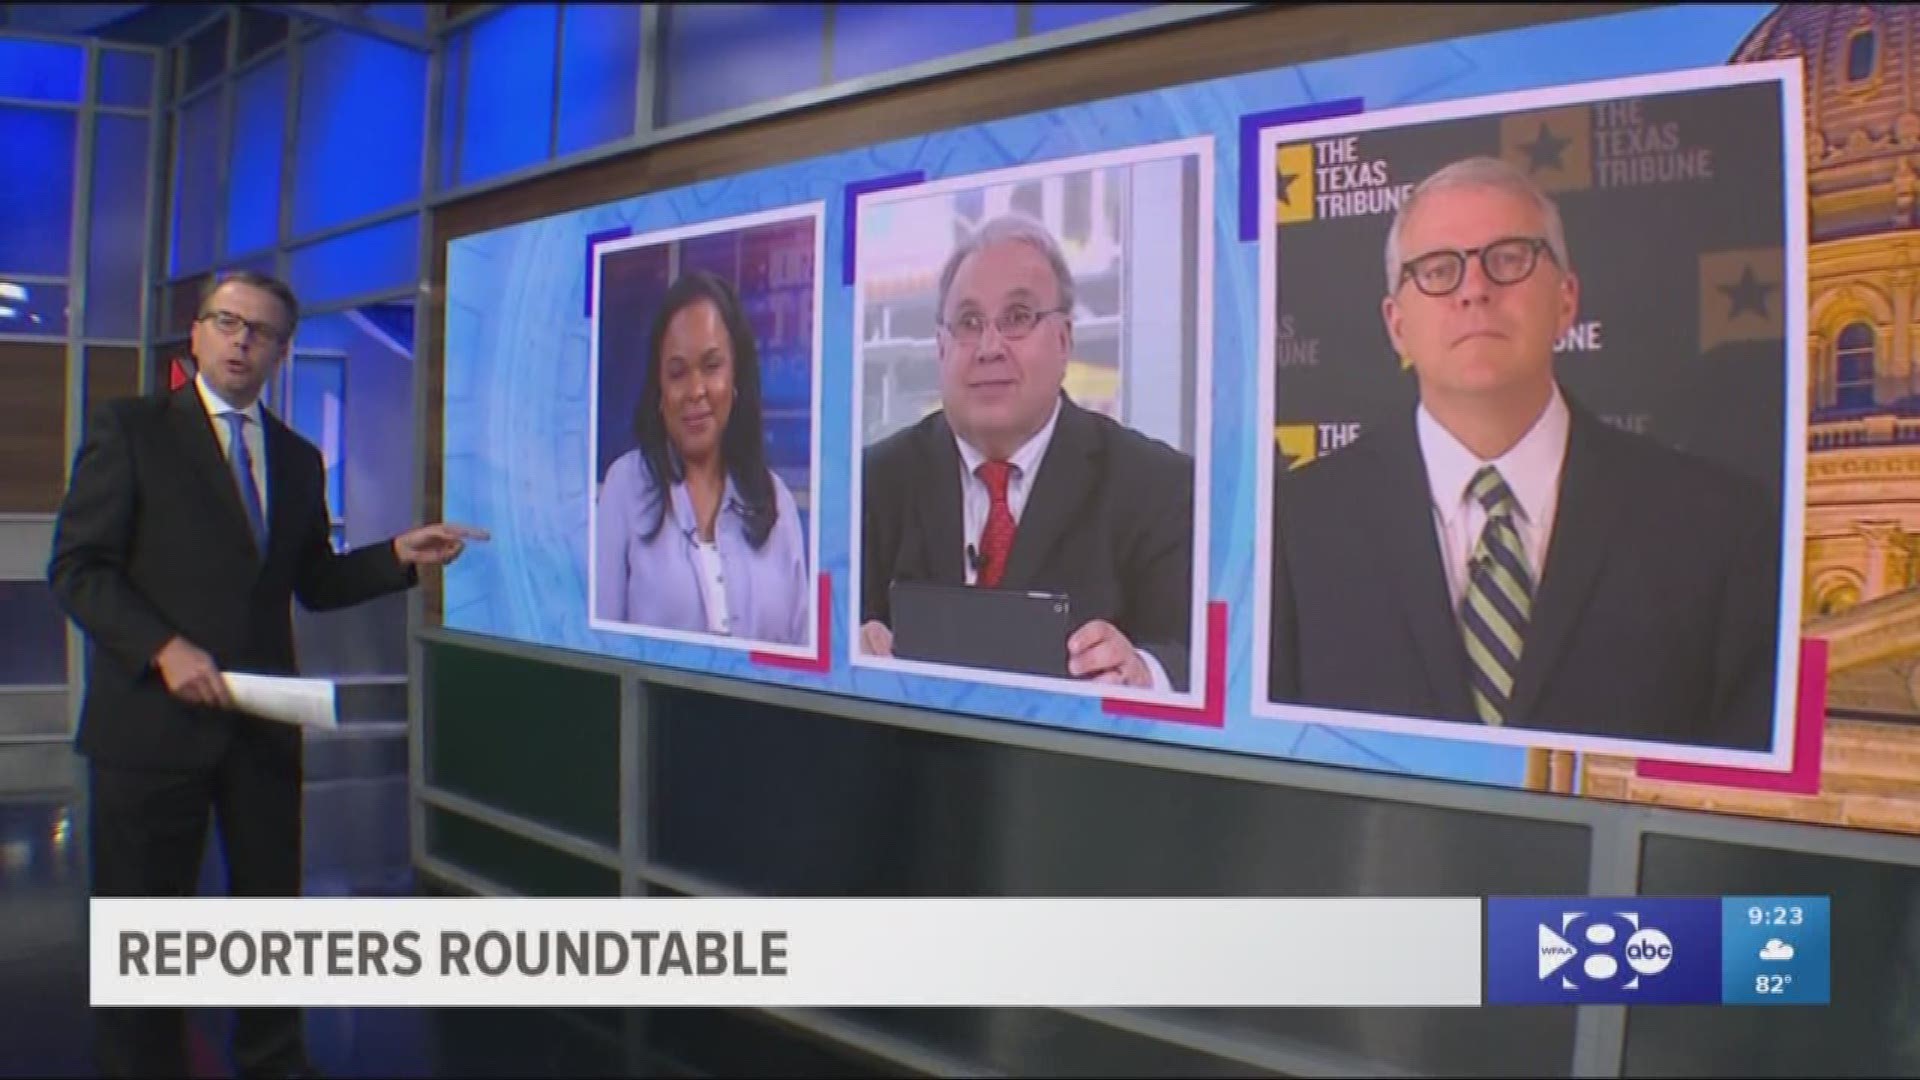 Reporters Roundtable puts the headlines in perspective each week. Host Jason, Bud and Ross returned along with Berna Dean Steptoe, WFAA's political producer. The three discussed whether President Donald Trump, Senator Ted Cruz, and Governor Greg Abbott wi